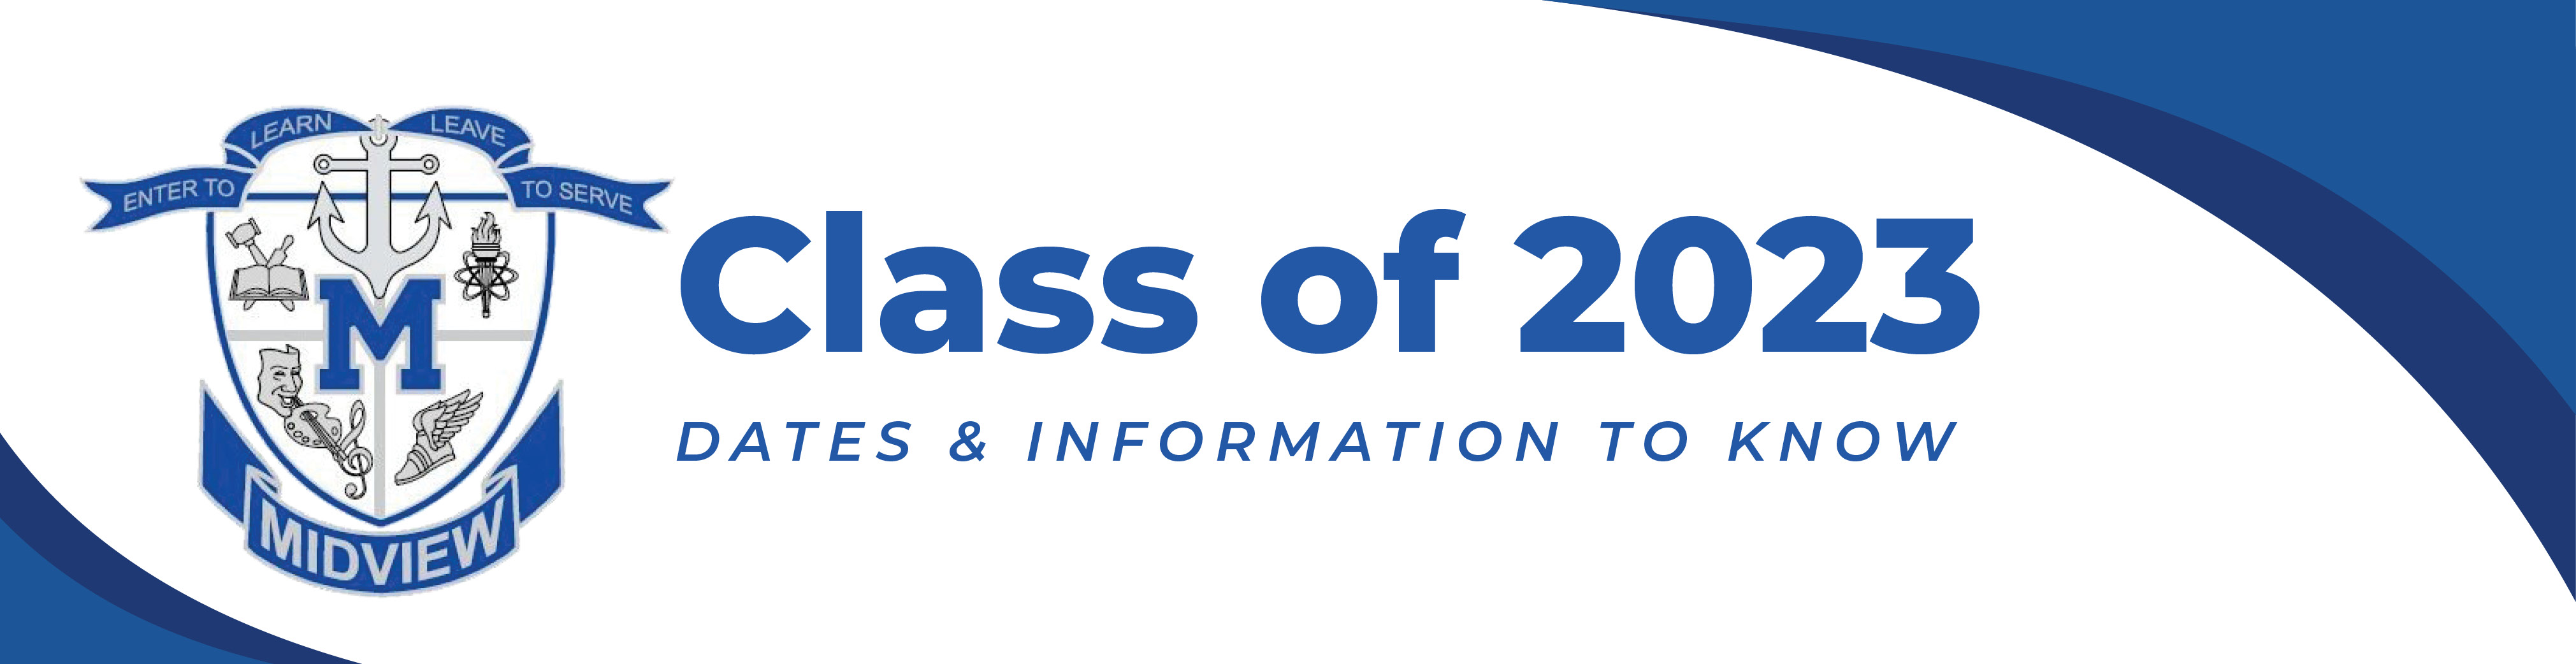 Class of 2023 Dates & Info to Know